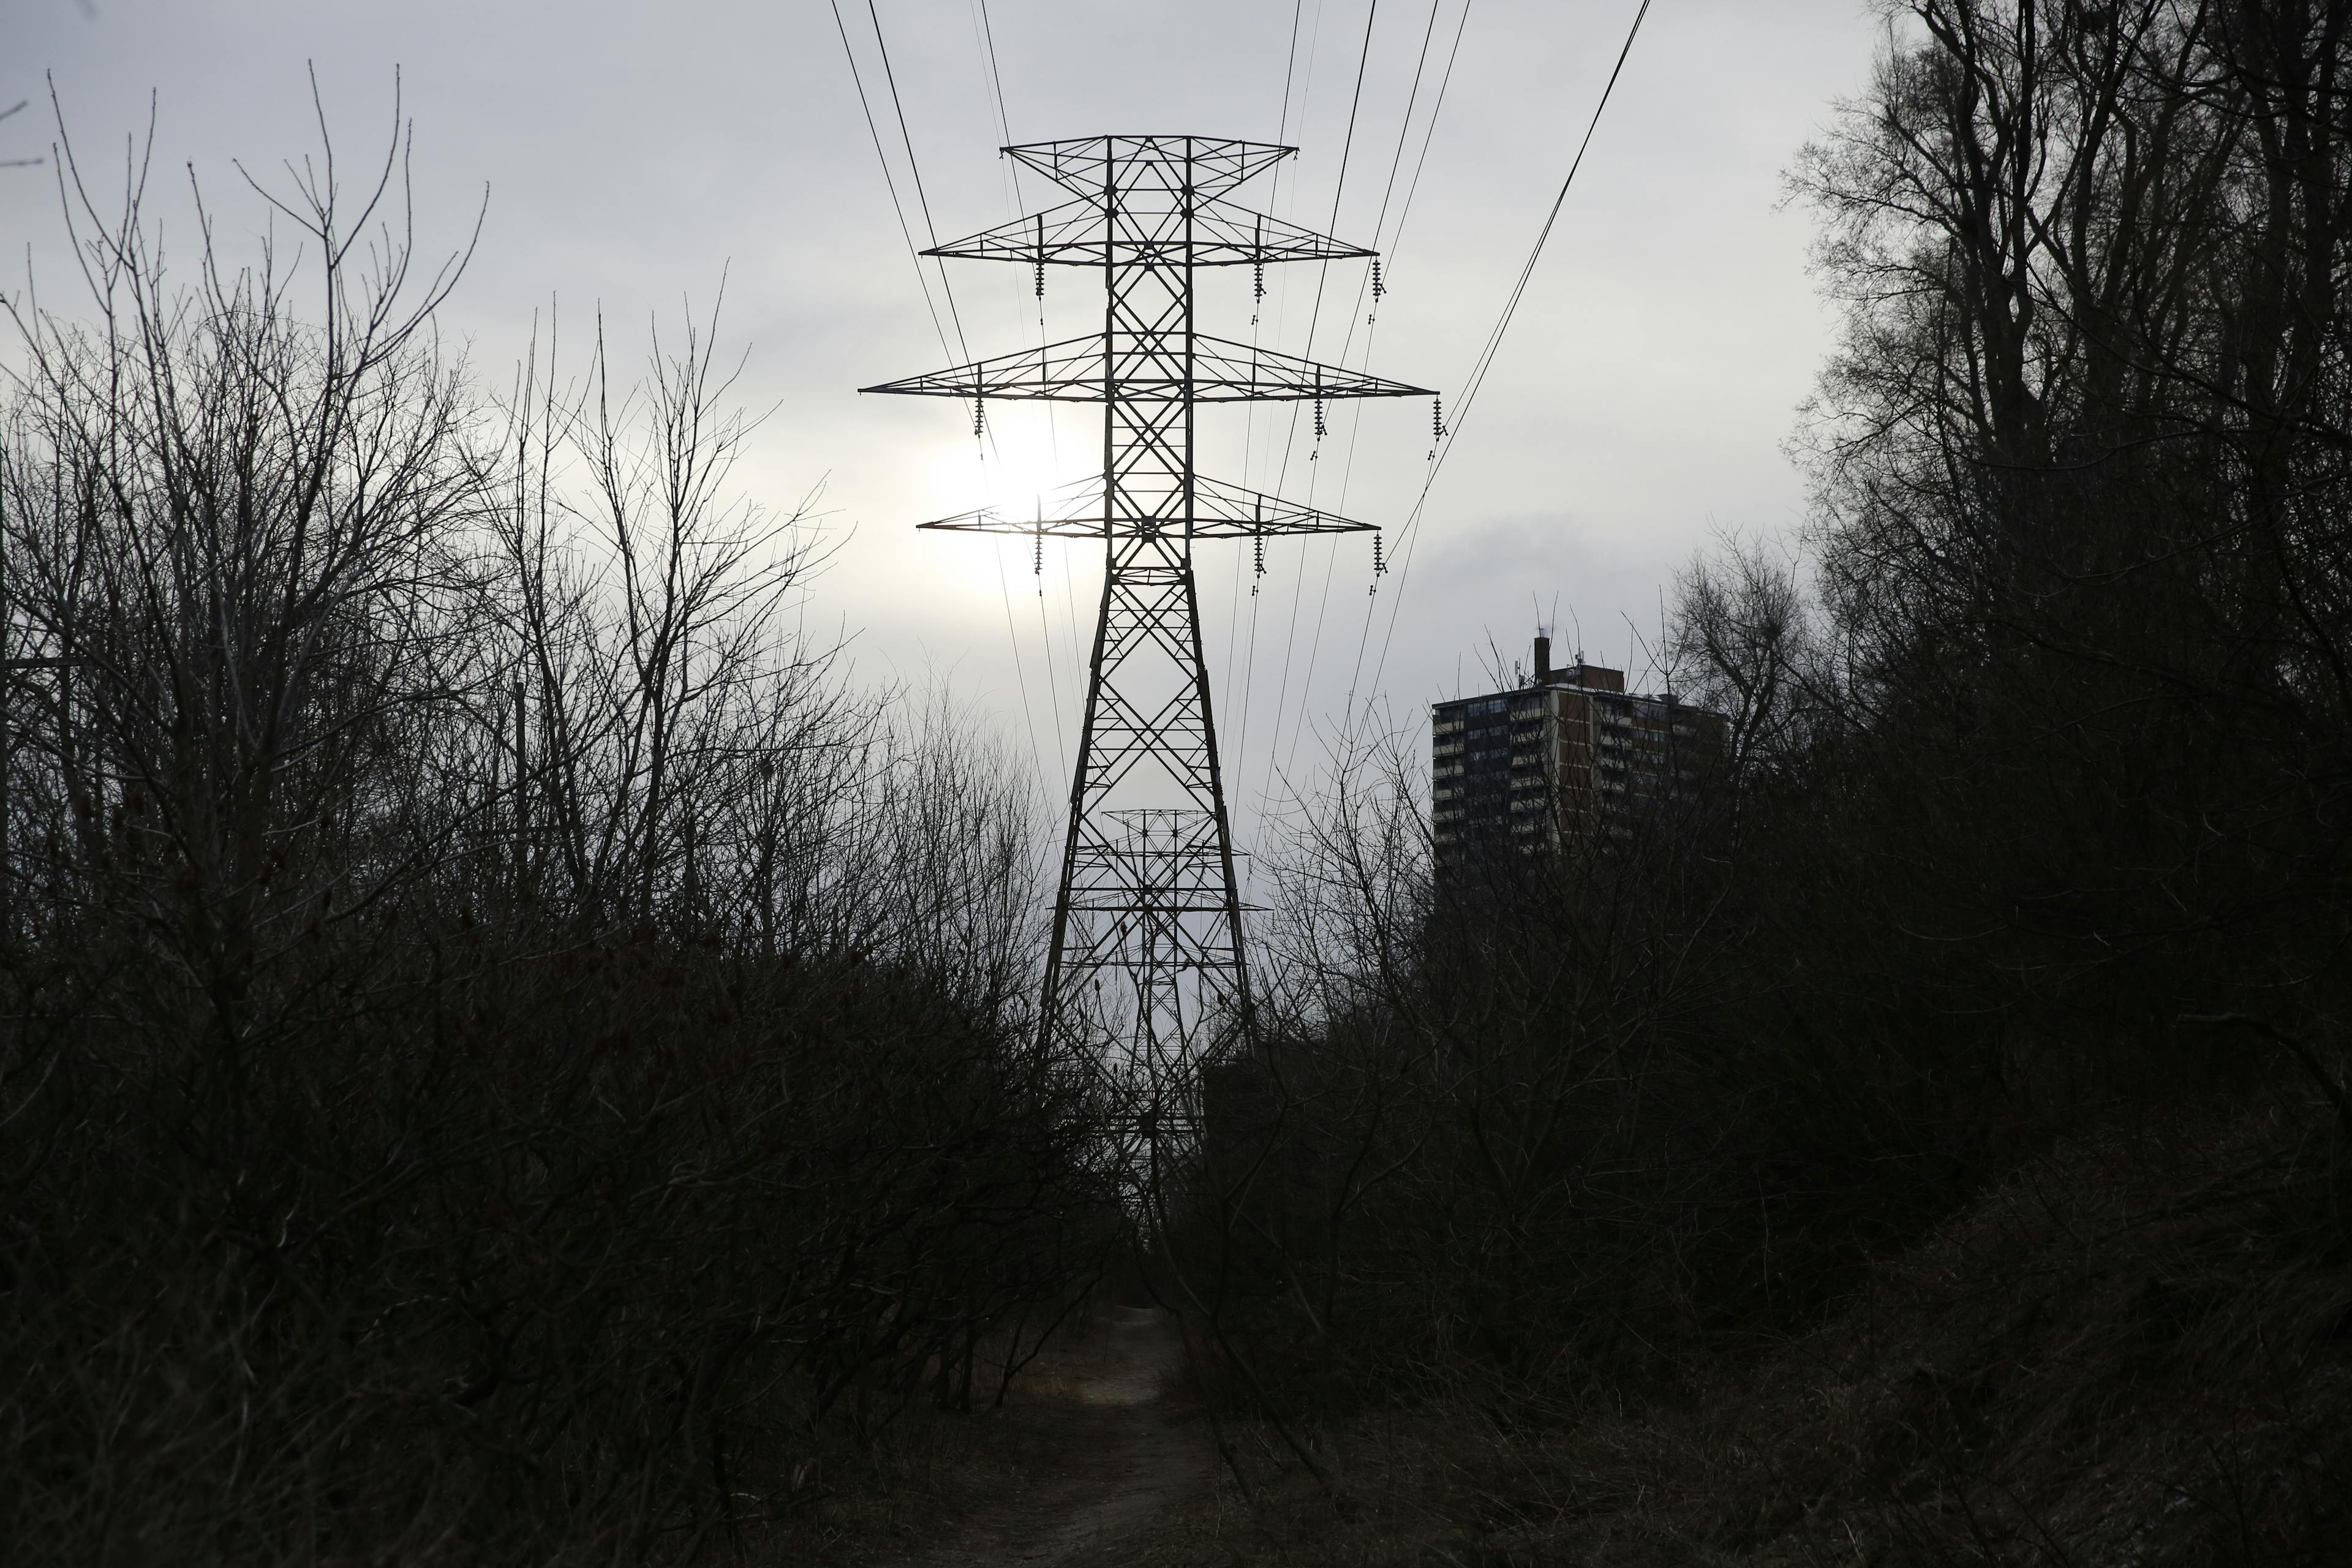 AG 2022: Ontario ratepayers vulnerable as province heads toward electricity supply shortage